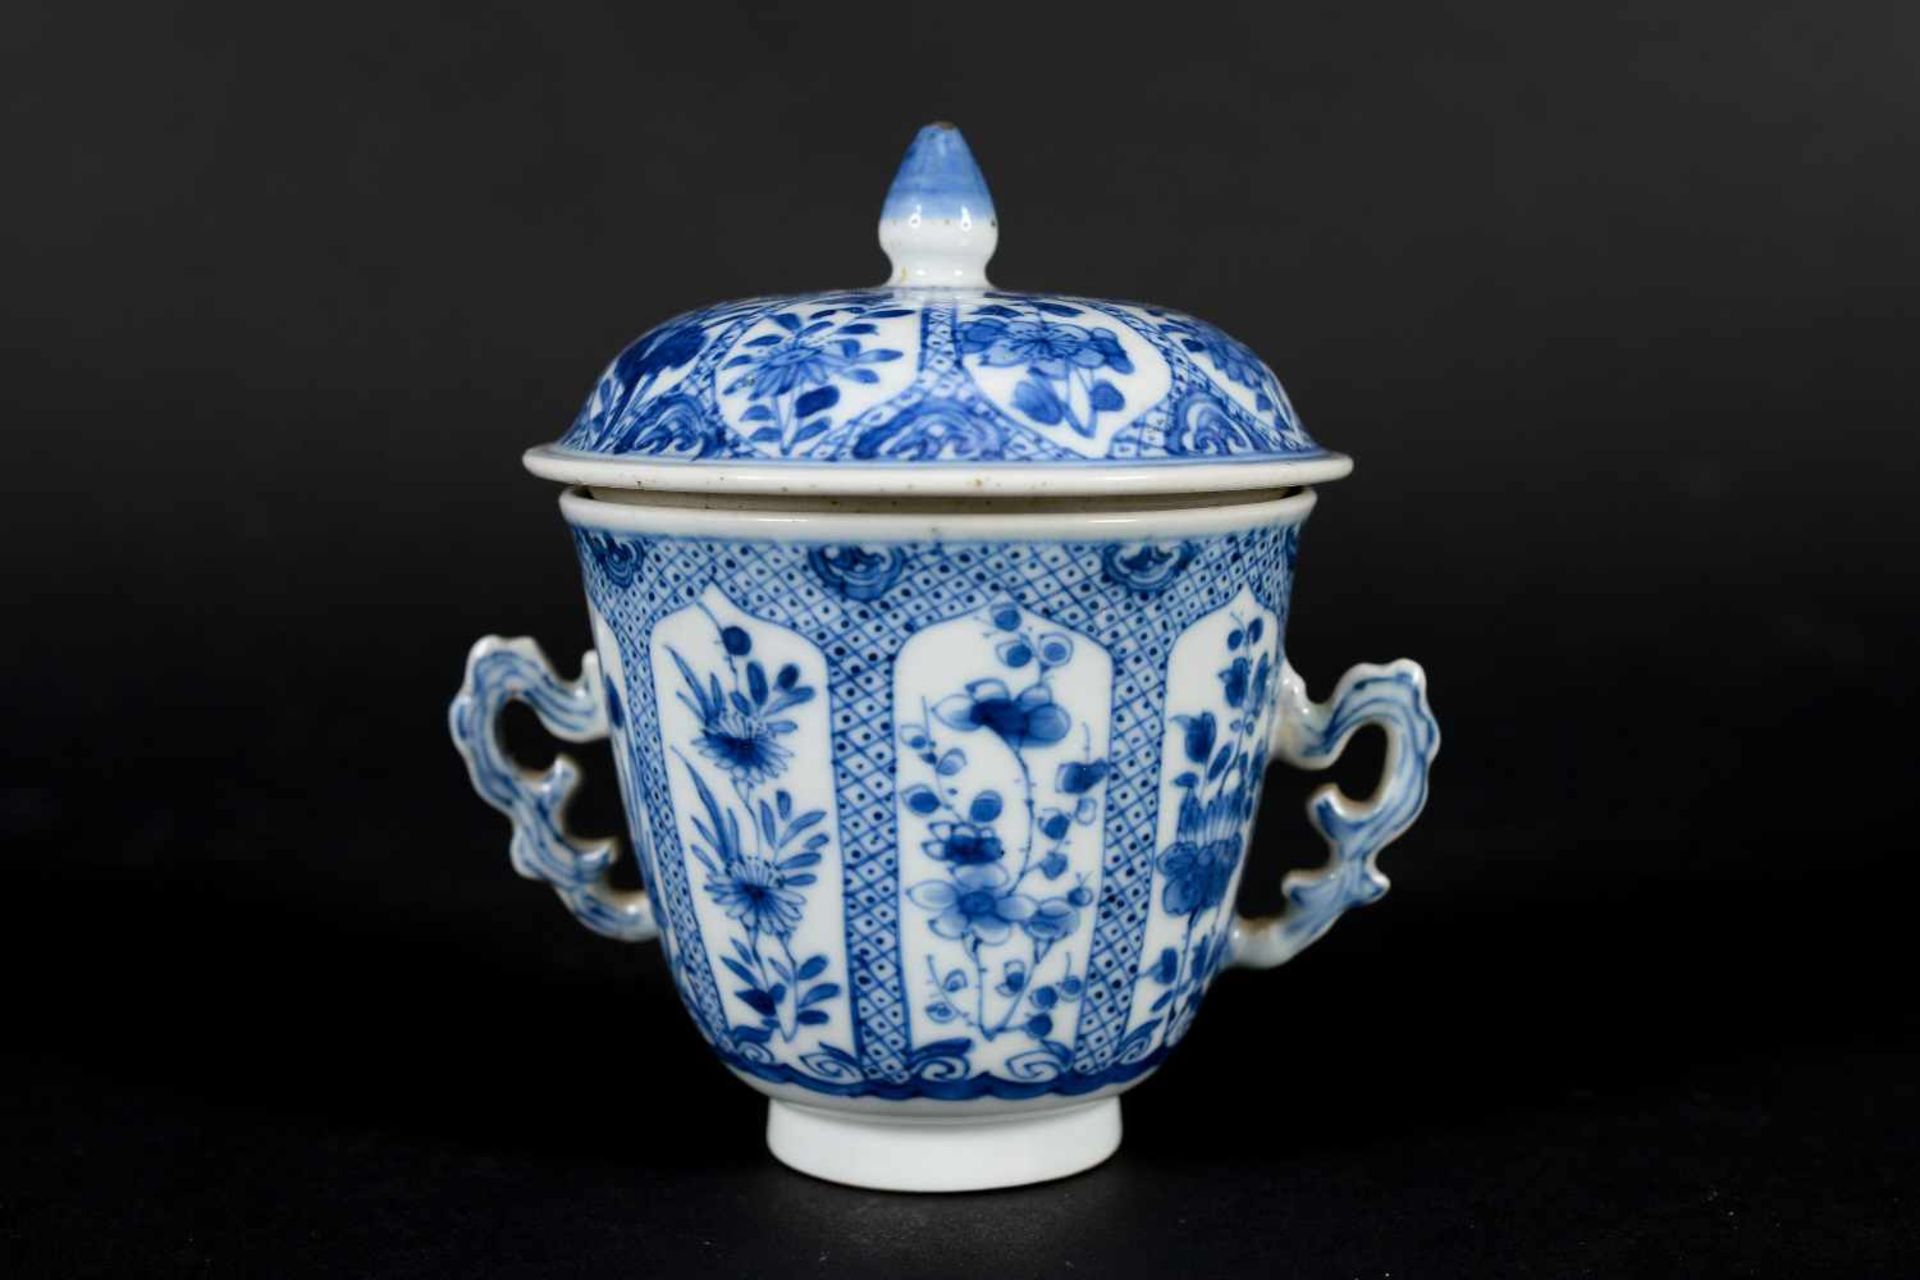 A blue and white porcelain lidded cup with two handles on a deep saucer, decorated with flowers. - Image 5 of 9